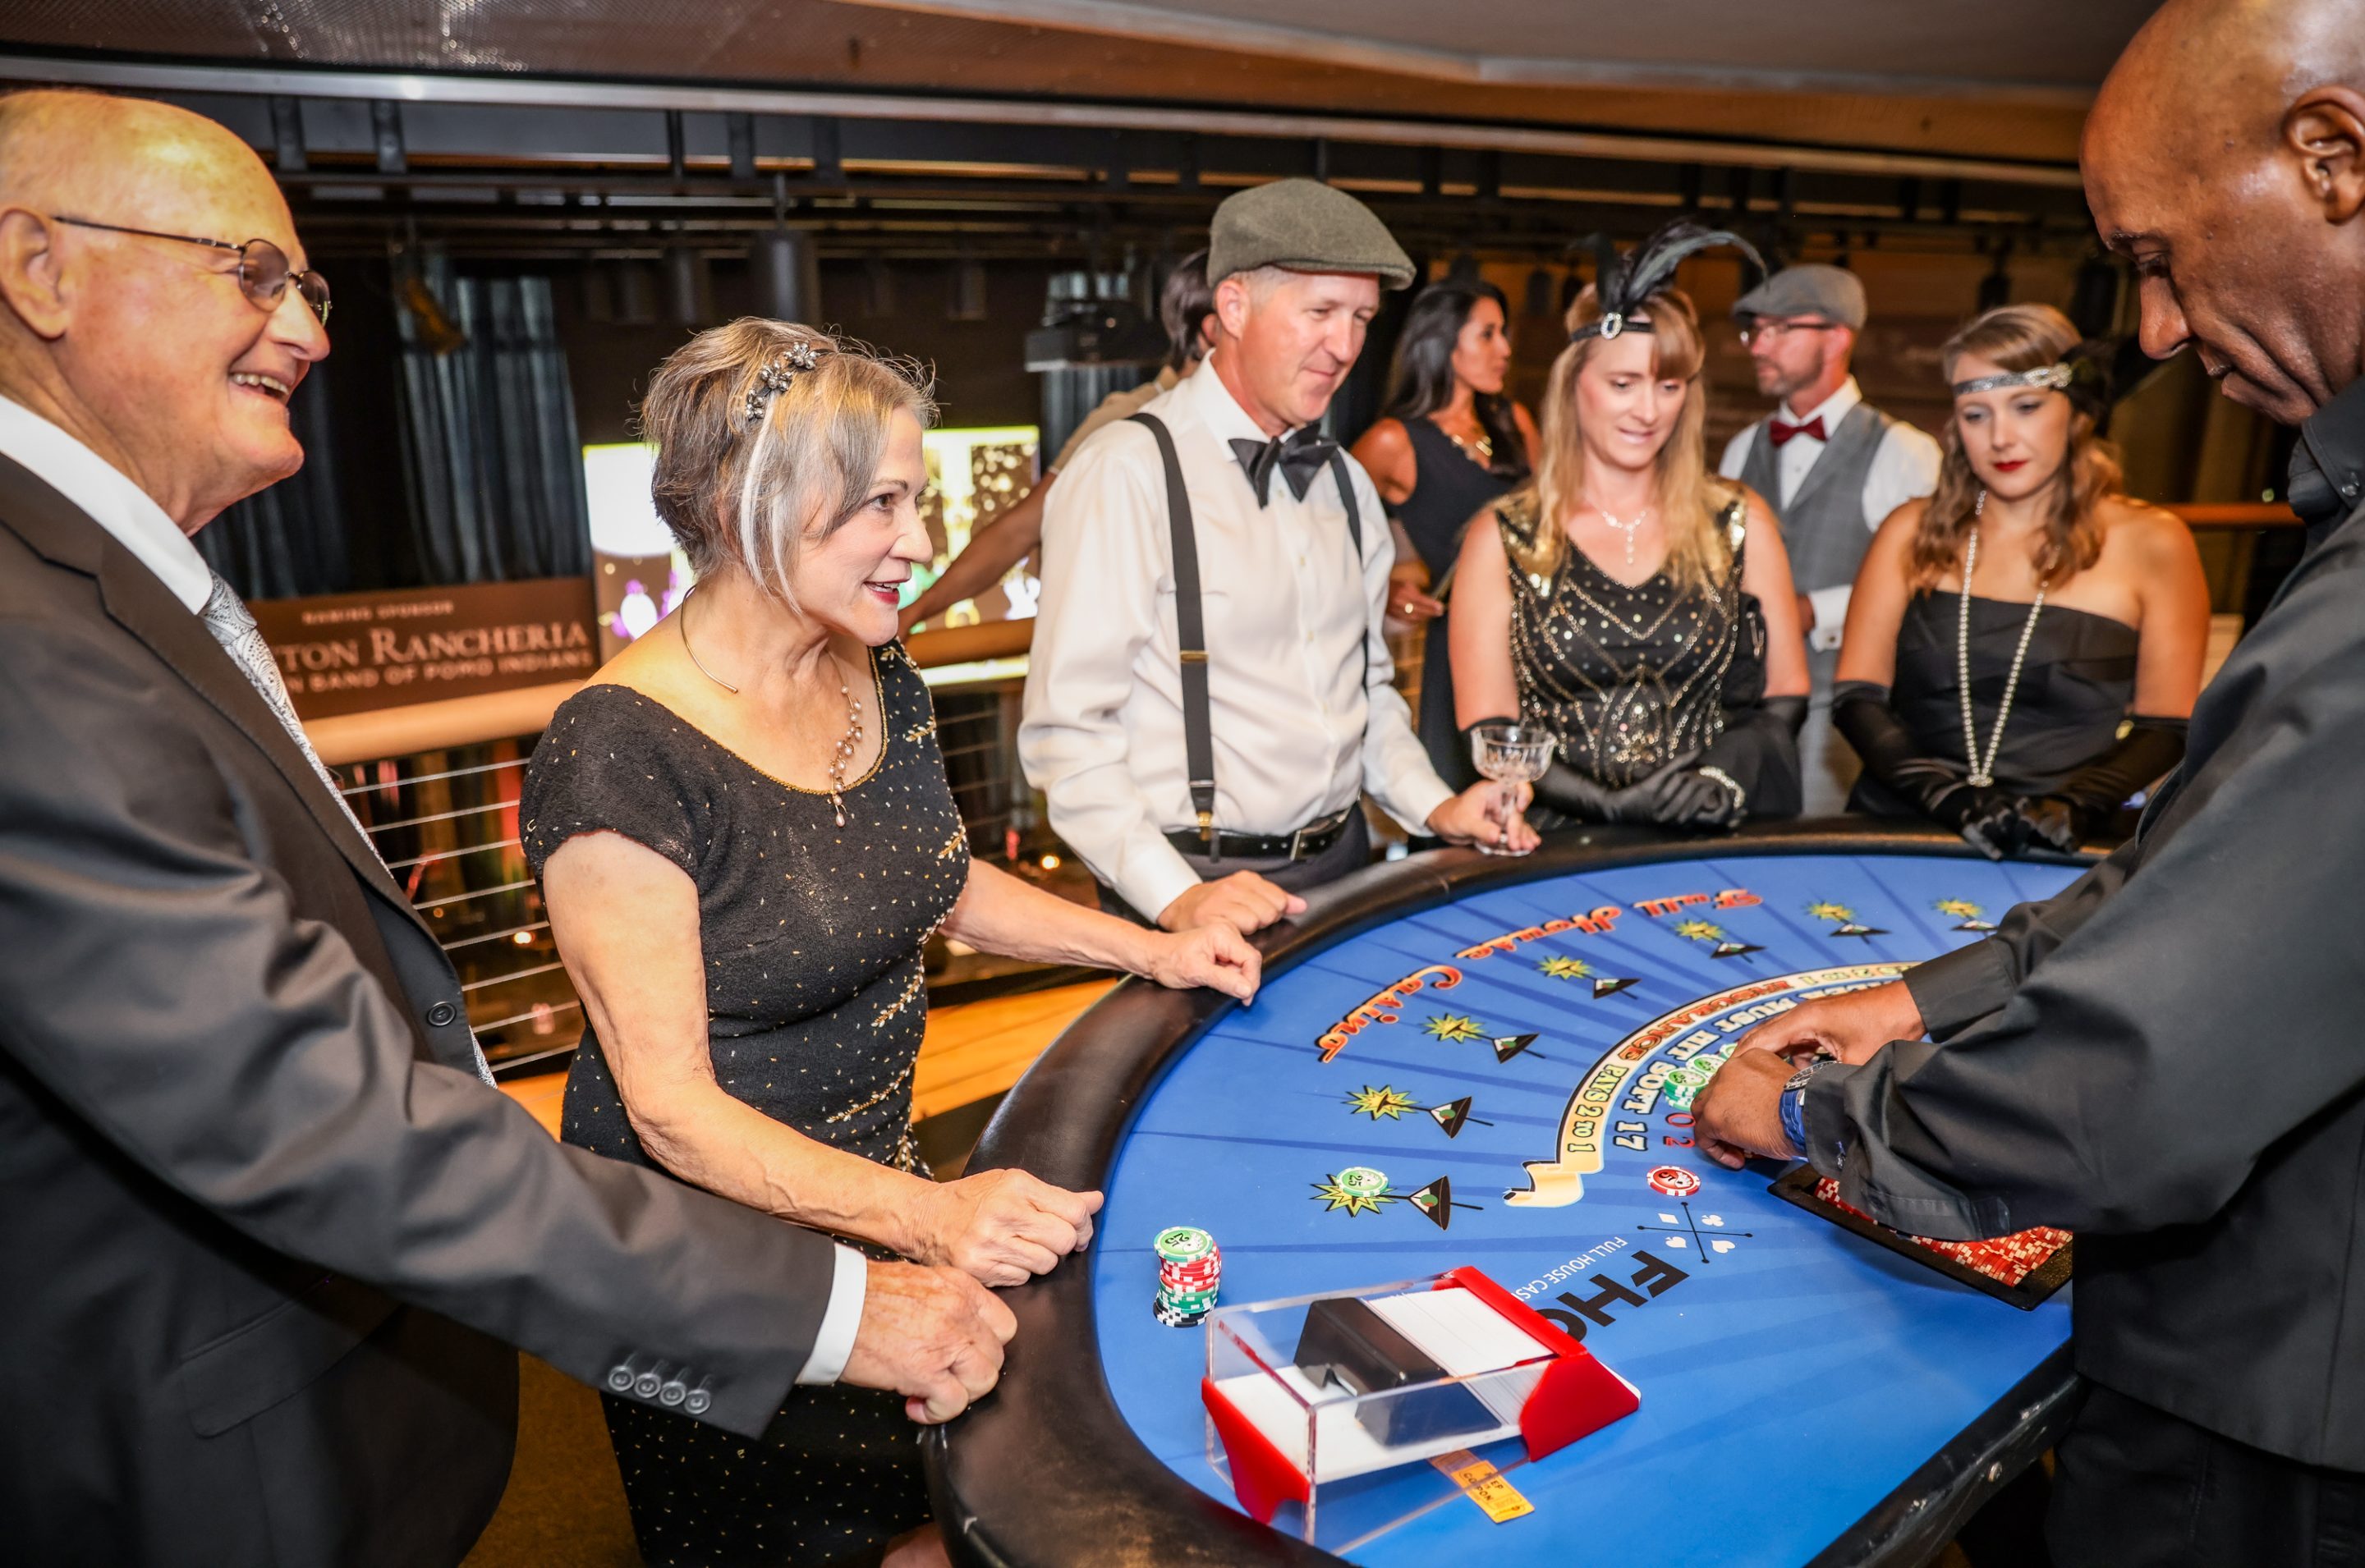 A group of people playing roulette at The LIME Foundation of Santa Rosa.